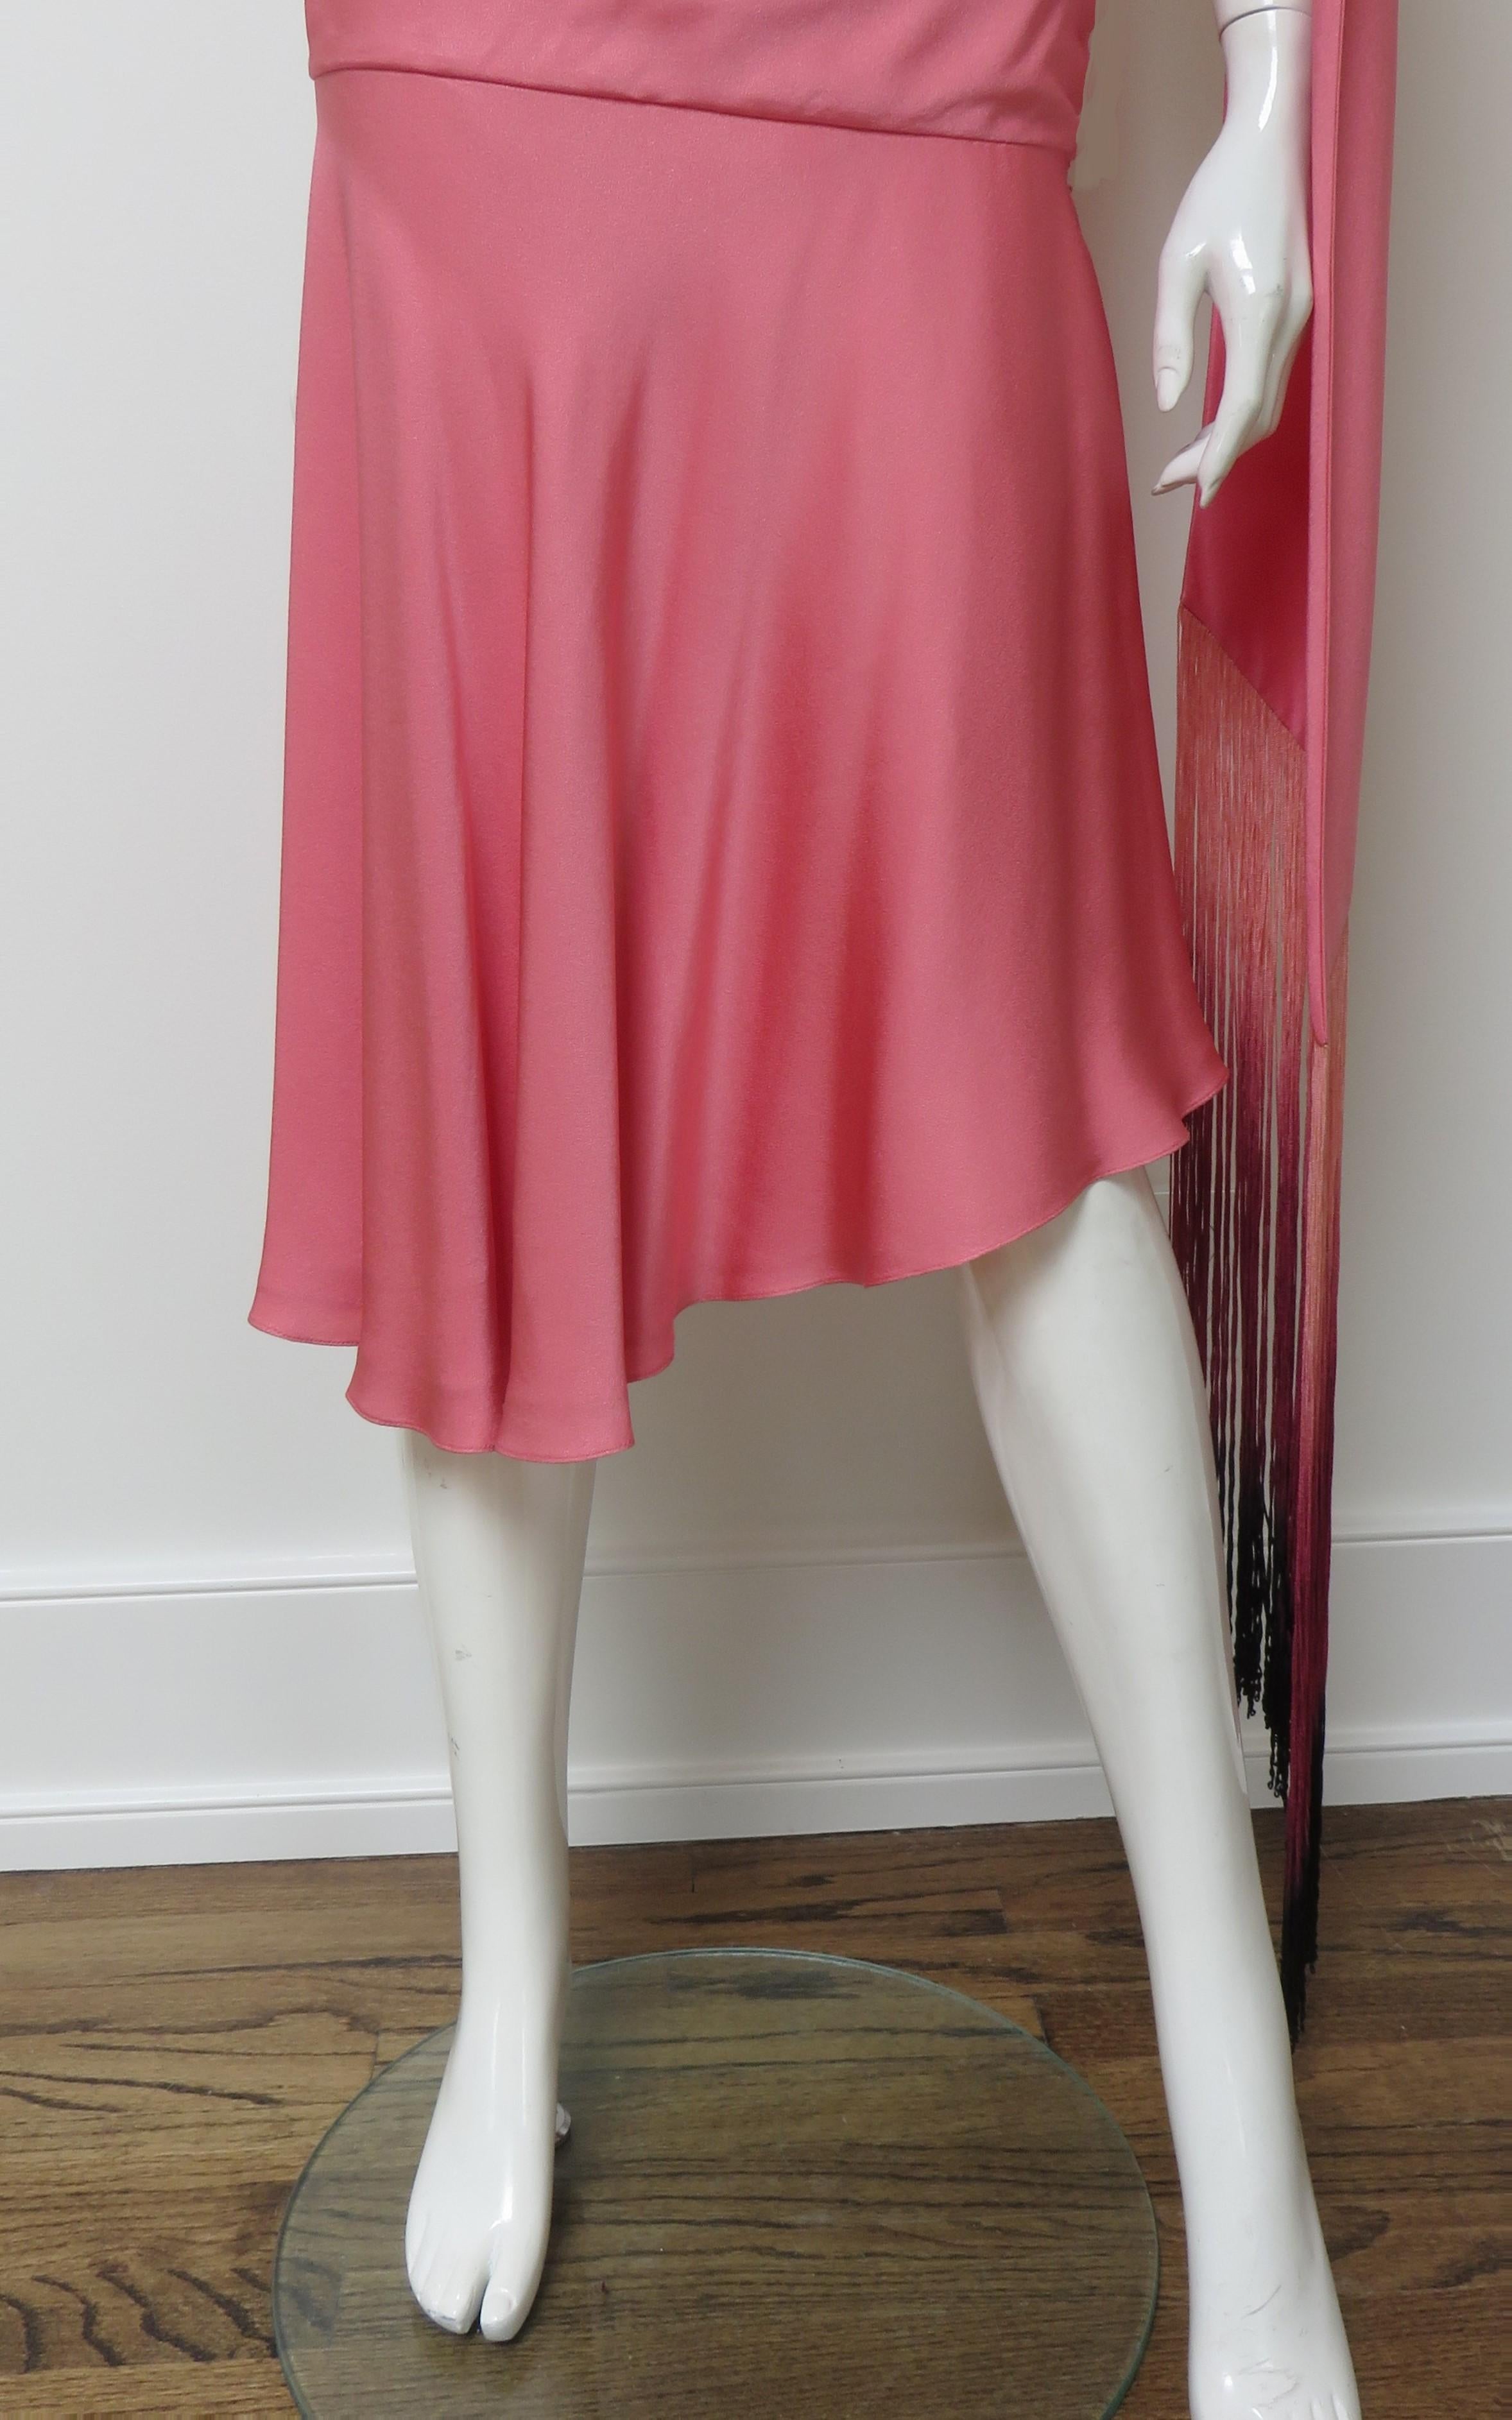 Alexander McQueen S/S 2008 Silk Halter Dress  In Excellent Condition For Sale In Water Mill, NY